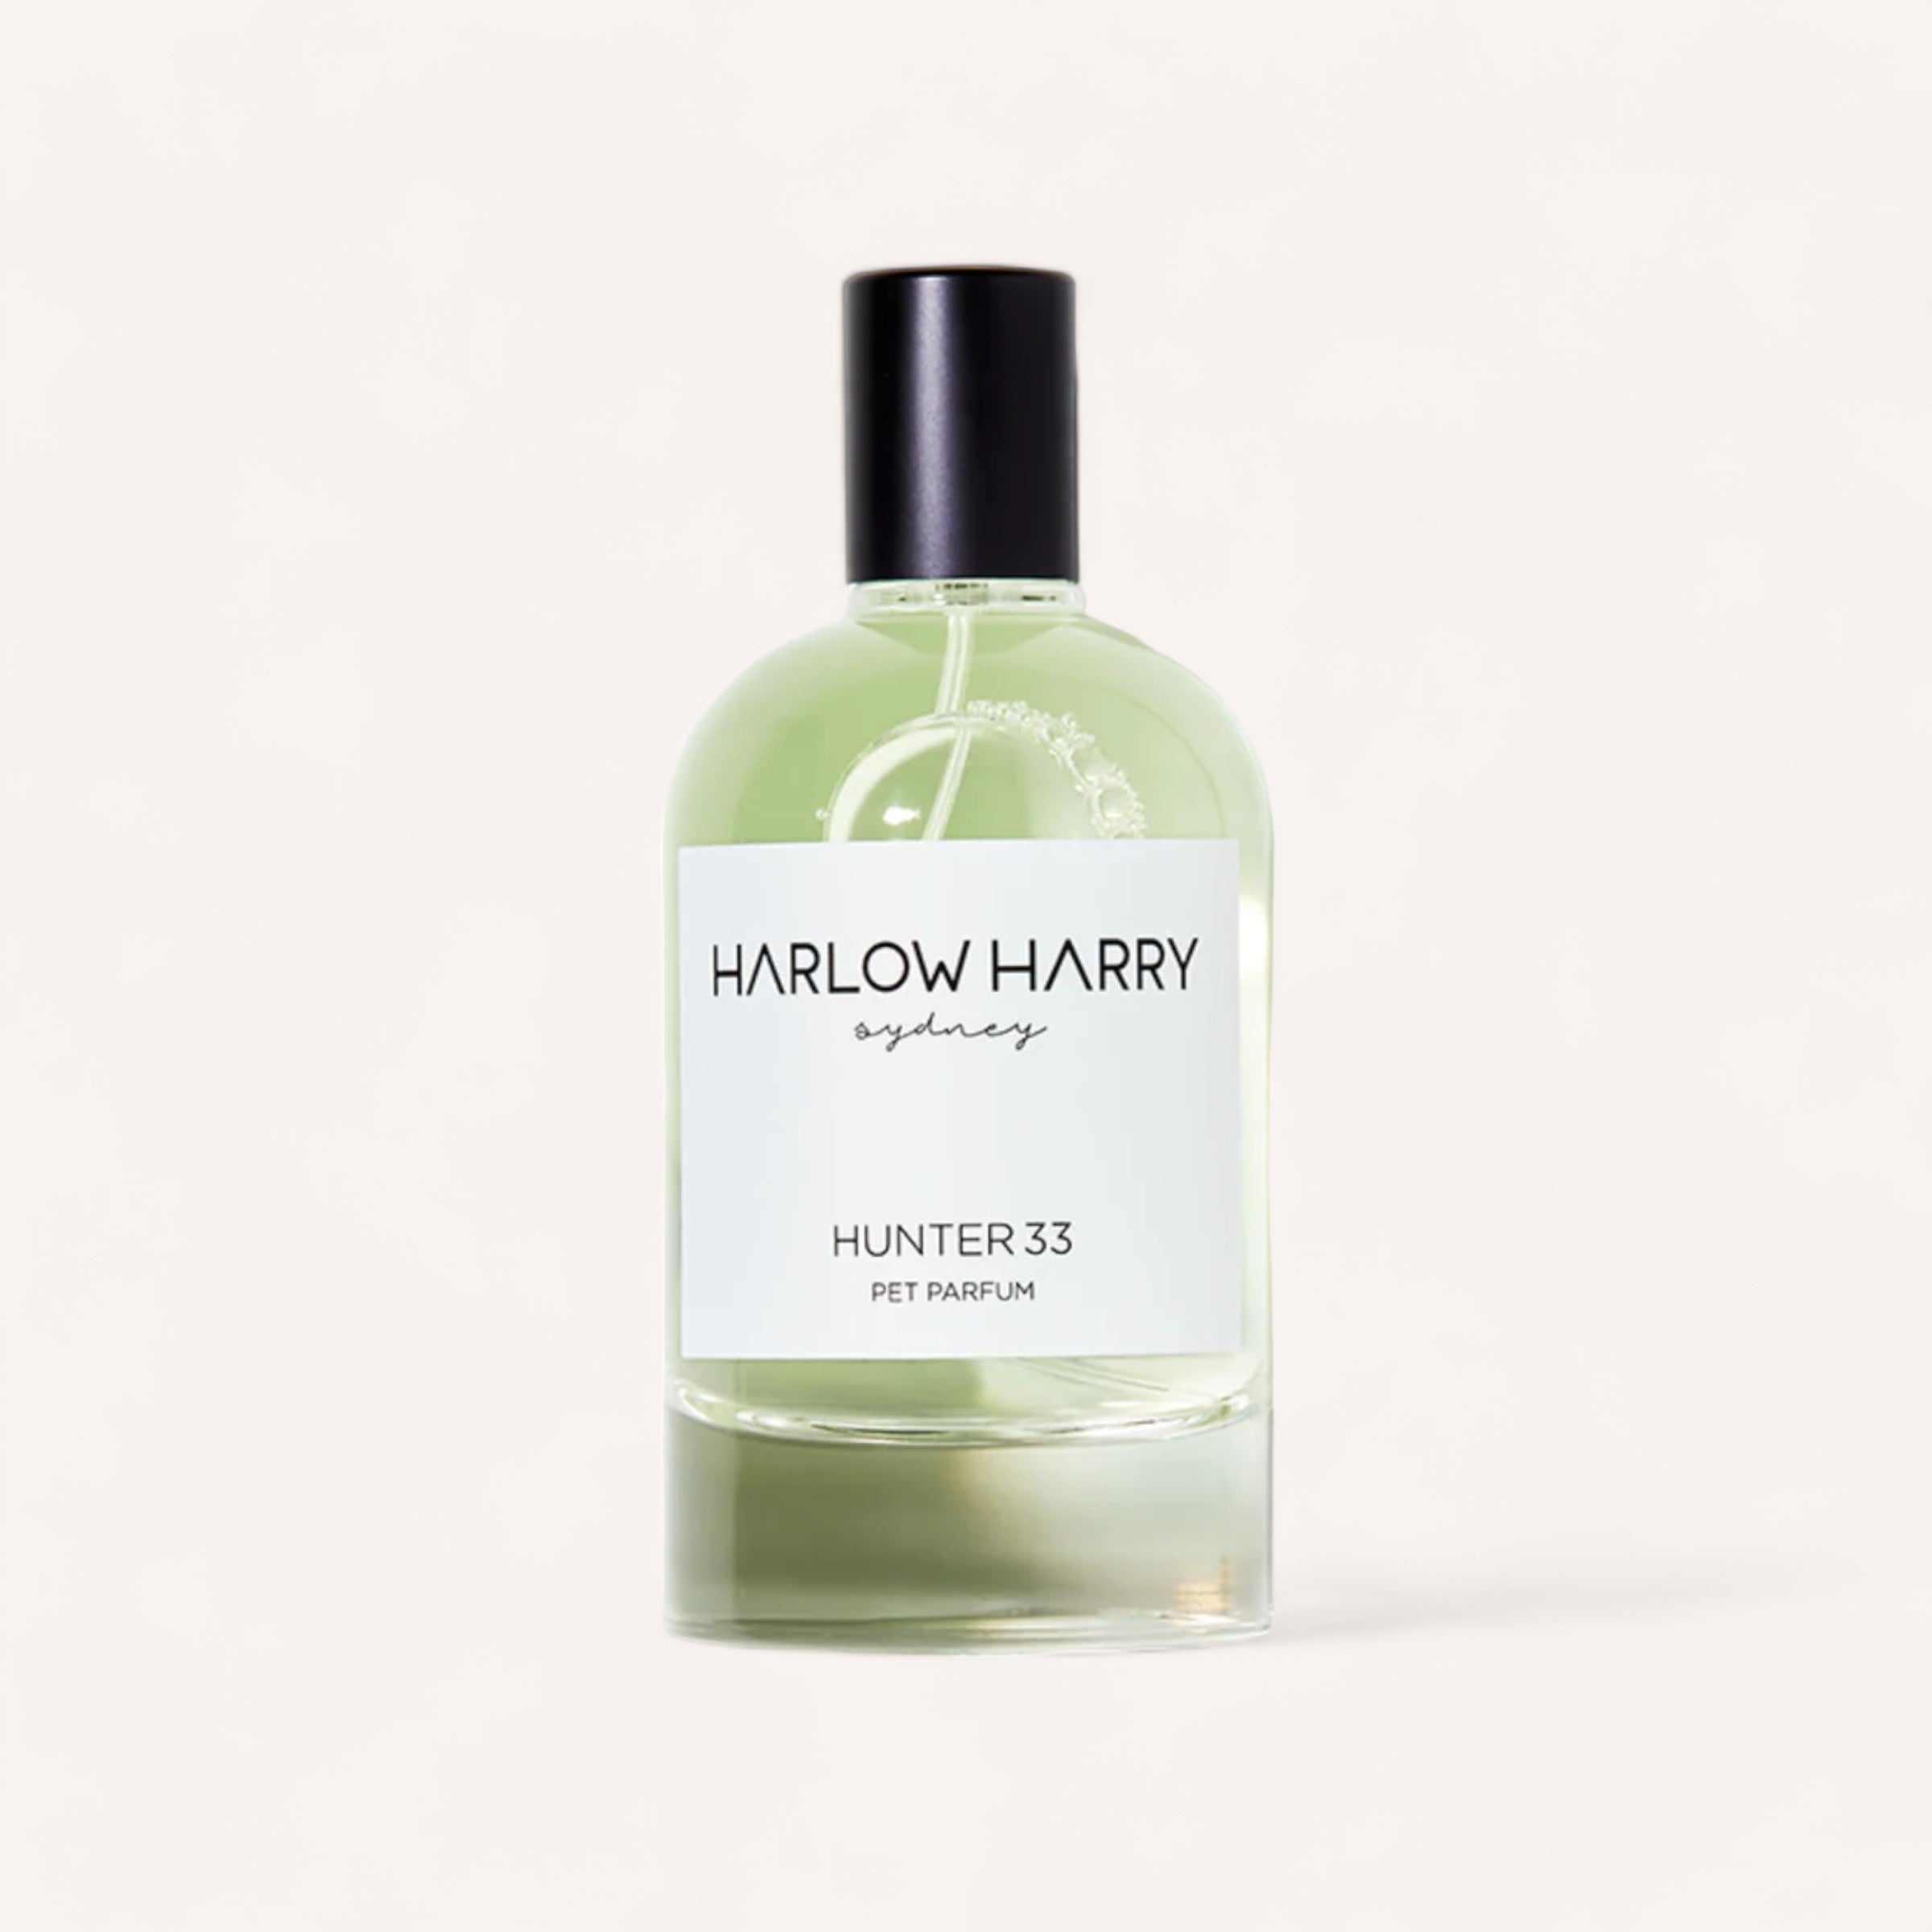 Elegant Hunter 33 Dog Perfume bottle with a clear, green-tinted liquid and a simple, chic label that reads "Harlow Harry Sydney, Hunter 33" - a unisex scent for dogs.